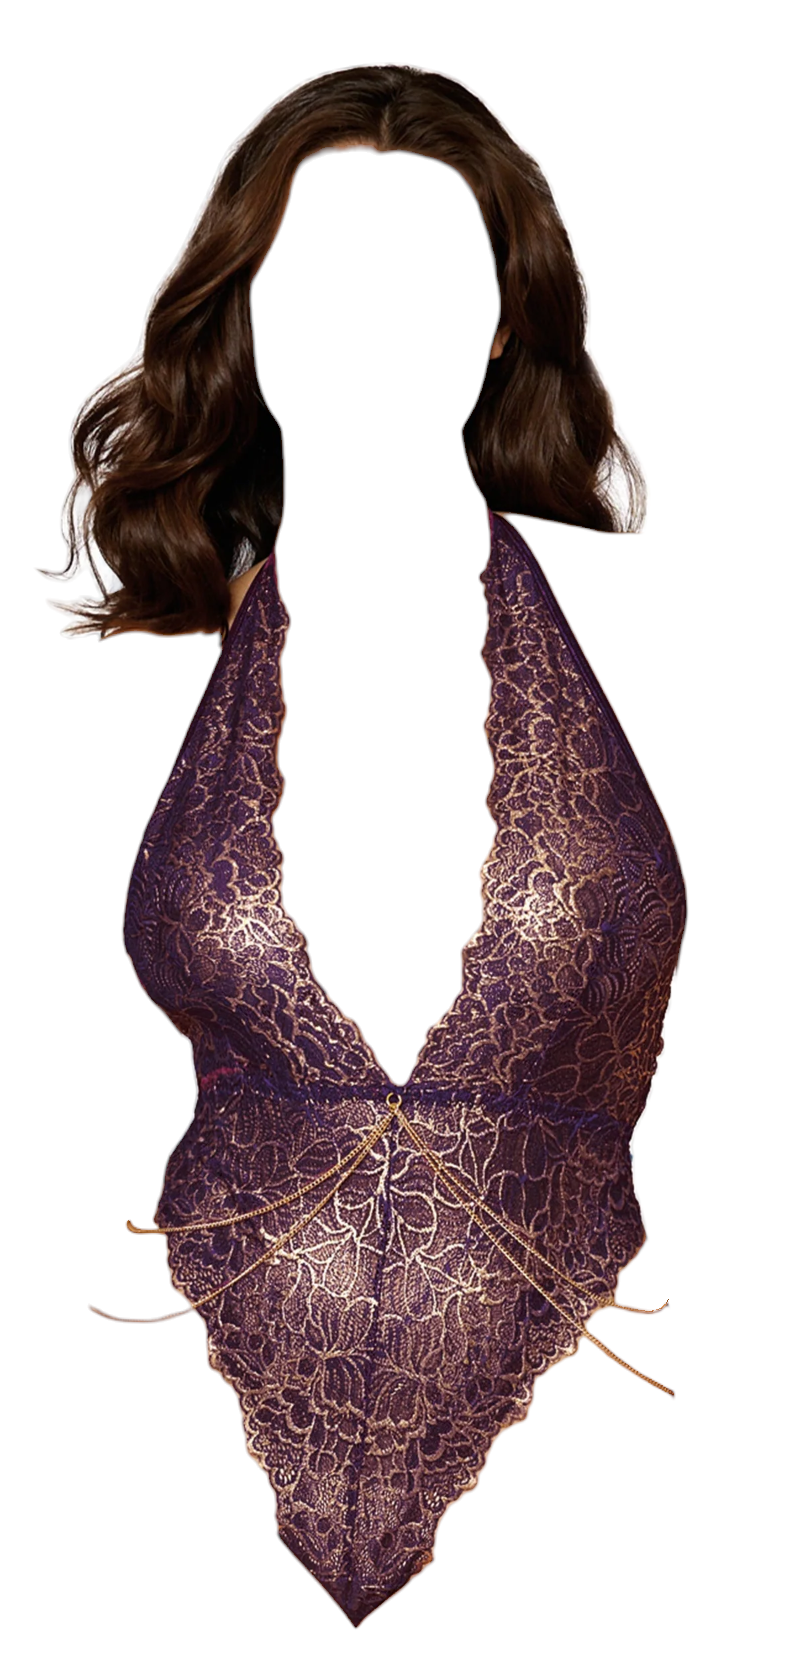 Dreamgirl Gold Foiled Stretch Lace Halter Teddy with Gold Colored Chain Detail Aubergine One Size